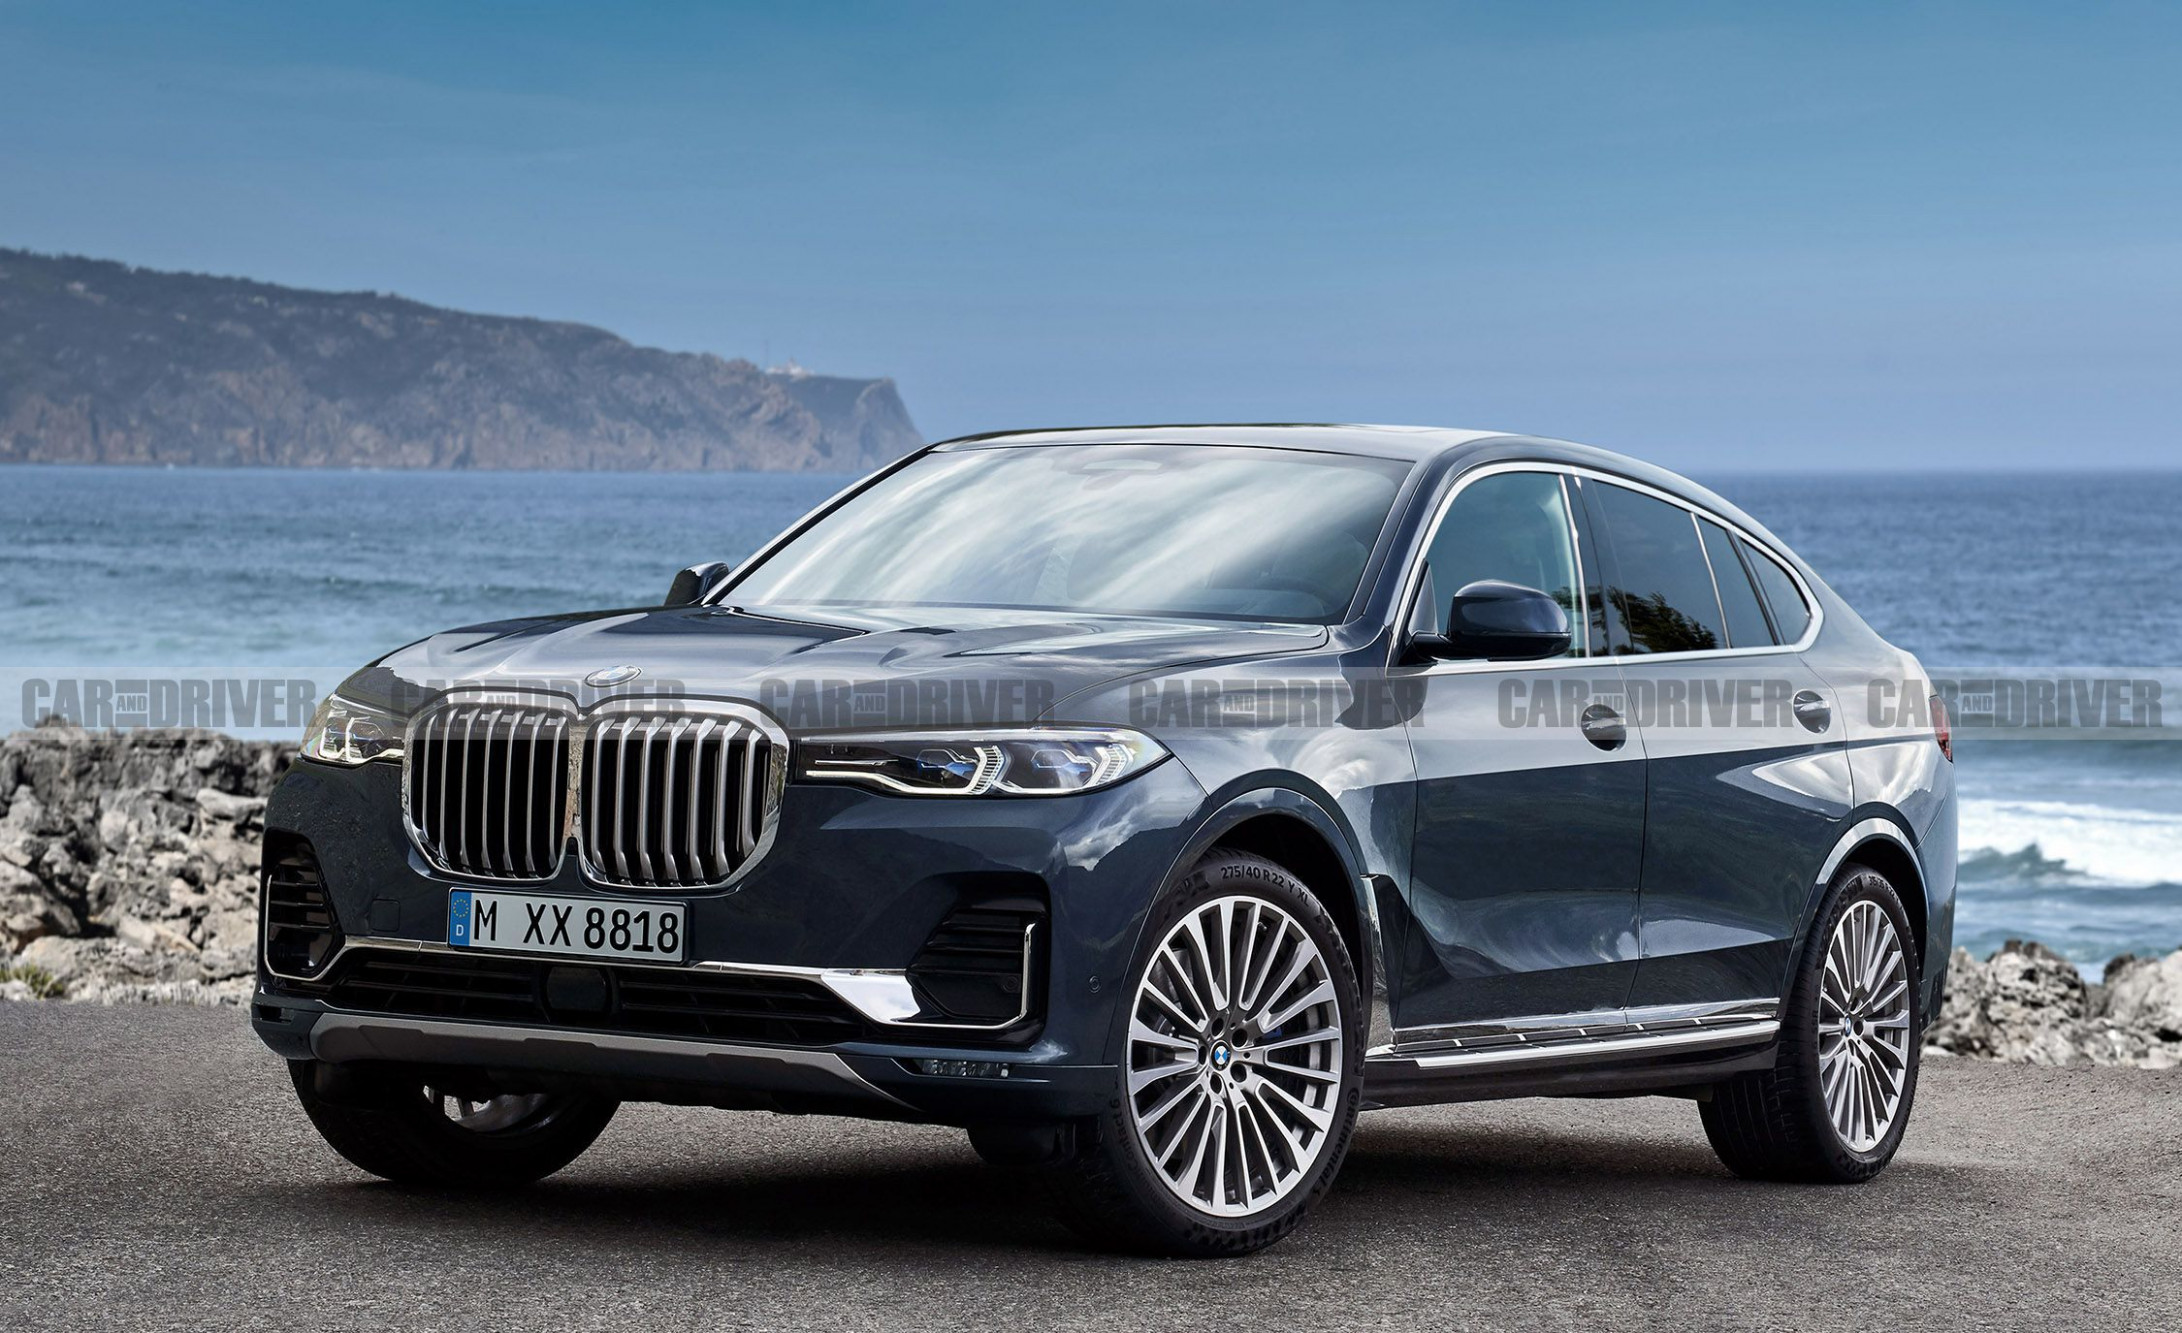 This Is What a BMW X3 Would Look Like - bmw x8 suv price